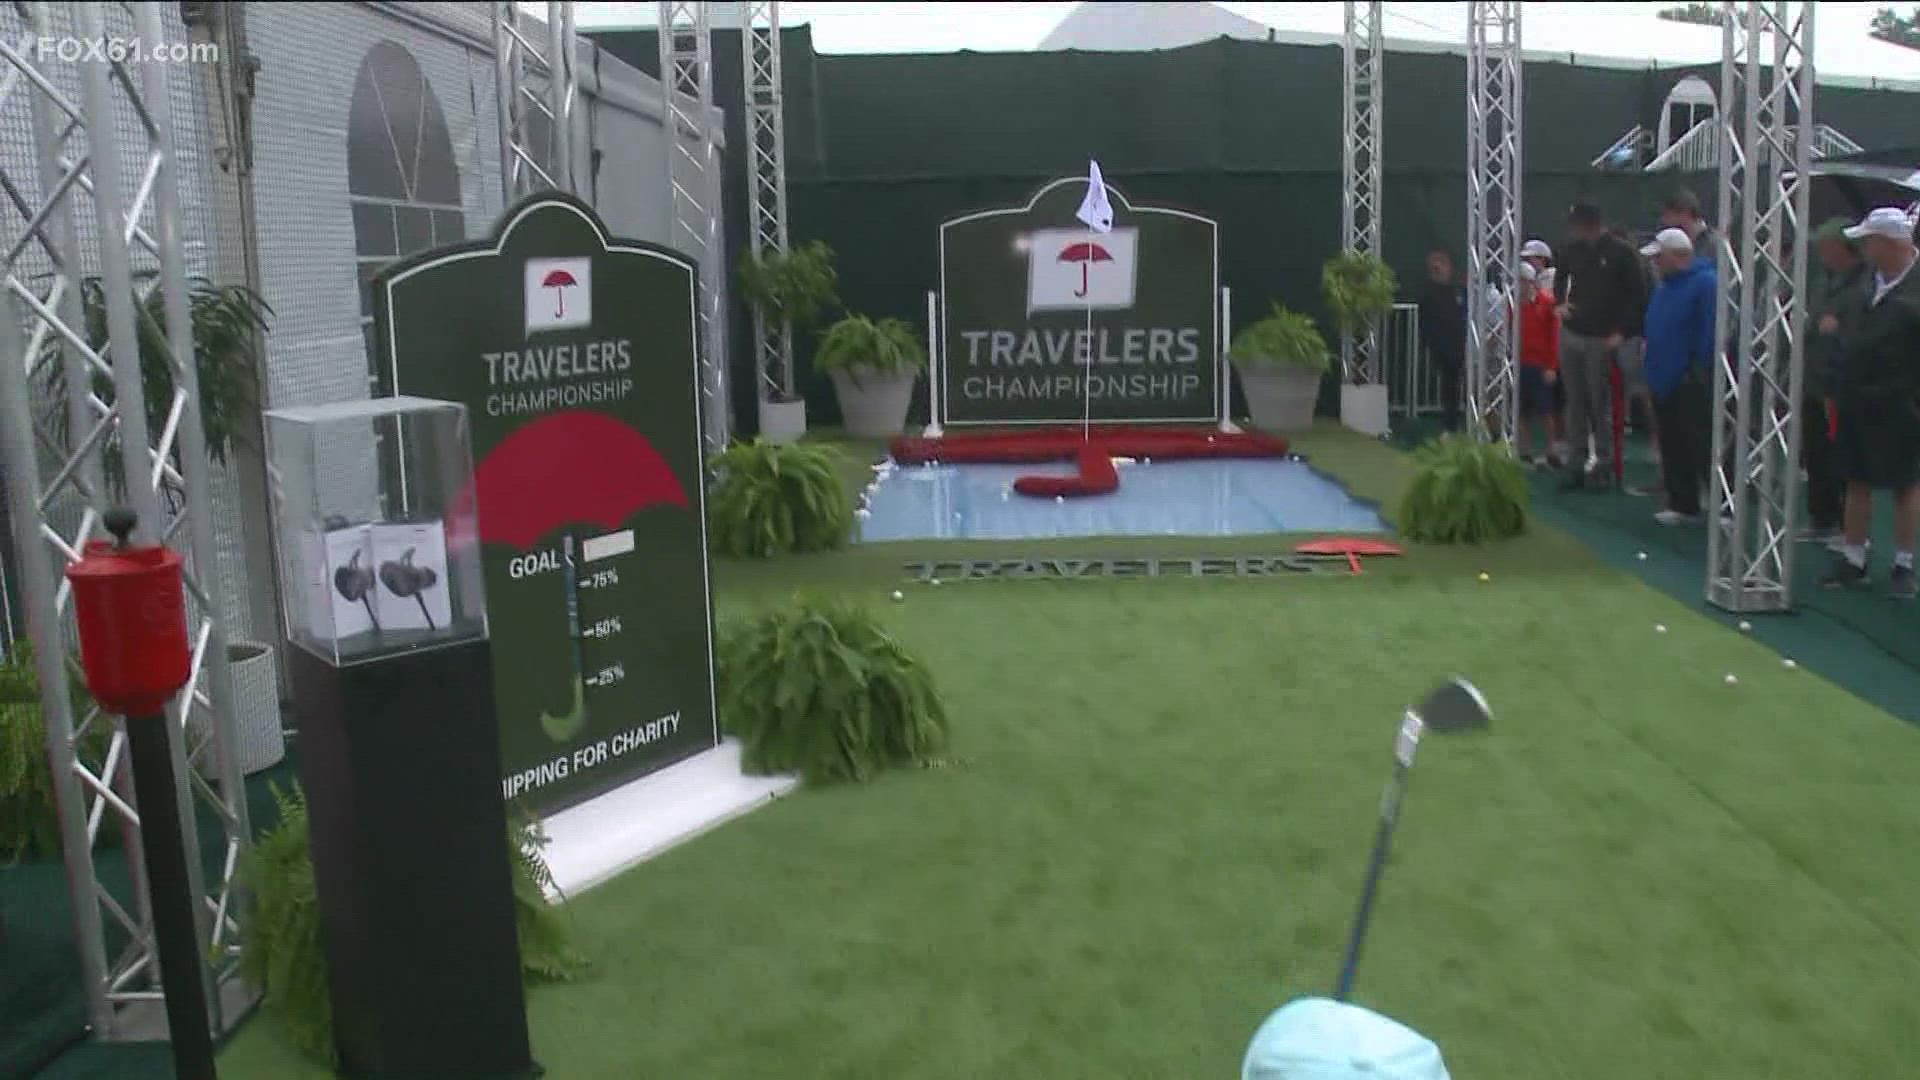 The Fan Zone is back at the Travelers Championship following a hiatus last year due to the COVID-19 pandemic.